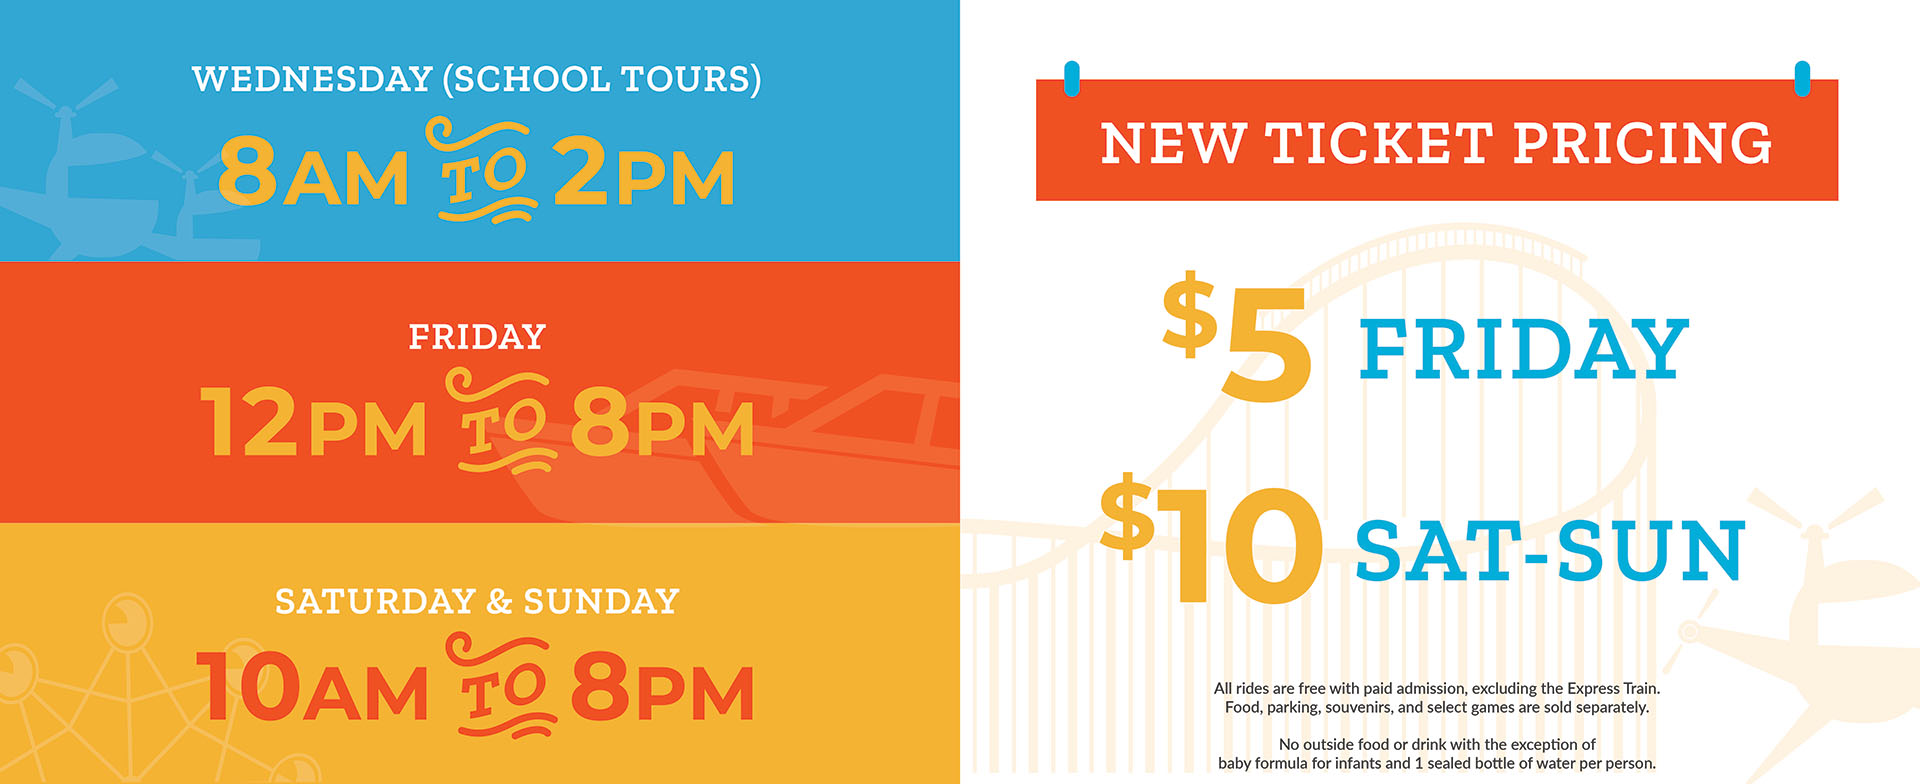 Wednesday (School Tours) 8AM - 2PM. Fridays 12PM - 8PM. Saturday & Sunday 10AM - 8PM. New Ticket Pricing $5 Friday, $10 Saturday and Sunday. All rides are free with paid admission, excluding the Express Train. Food, parking, souvenirs, and select games are sold separately. No outside food or drink with the exception of formula for infants and one sealed bottle of water per person.